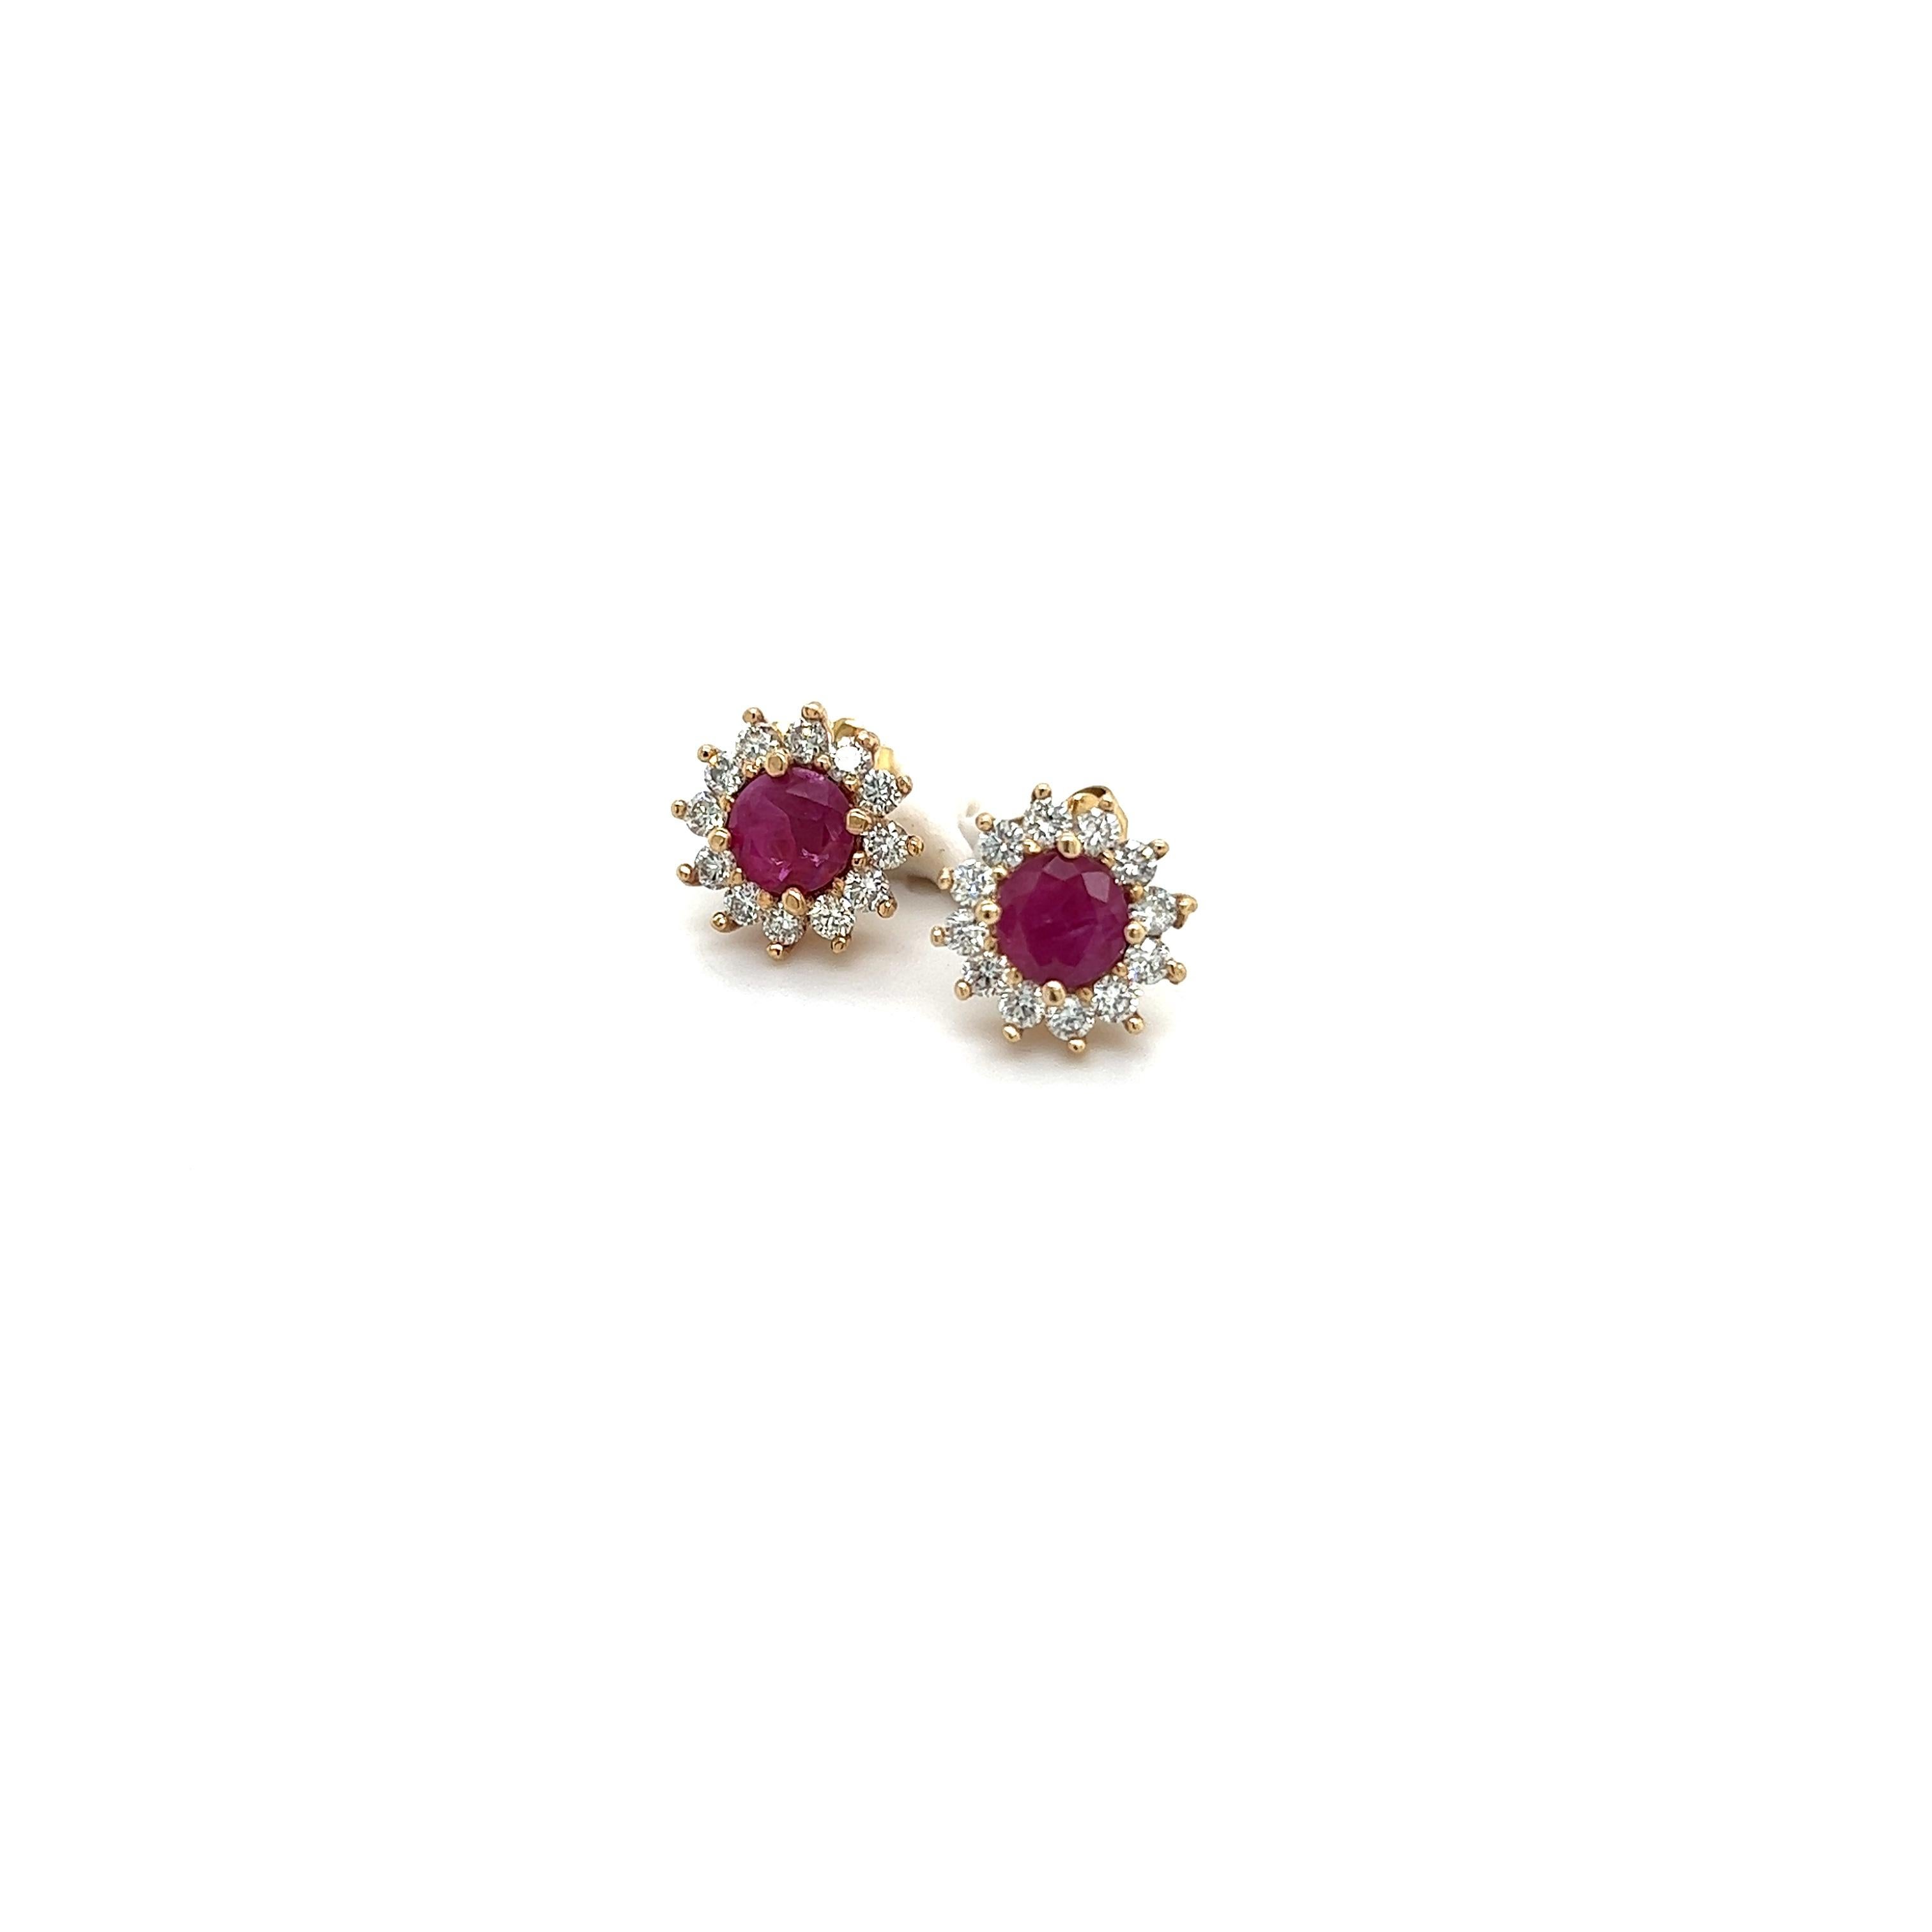 Natural Ruby Diamond Earrings 14k Yellow Gold 2.20 TCW Certified For Sale 1